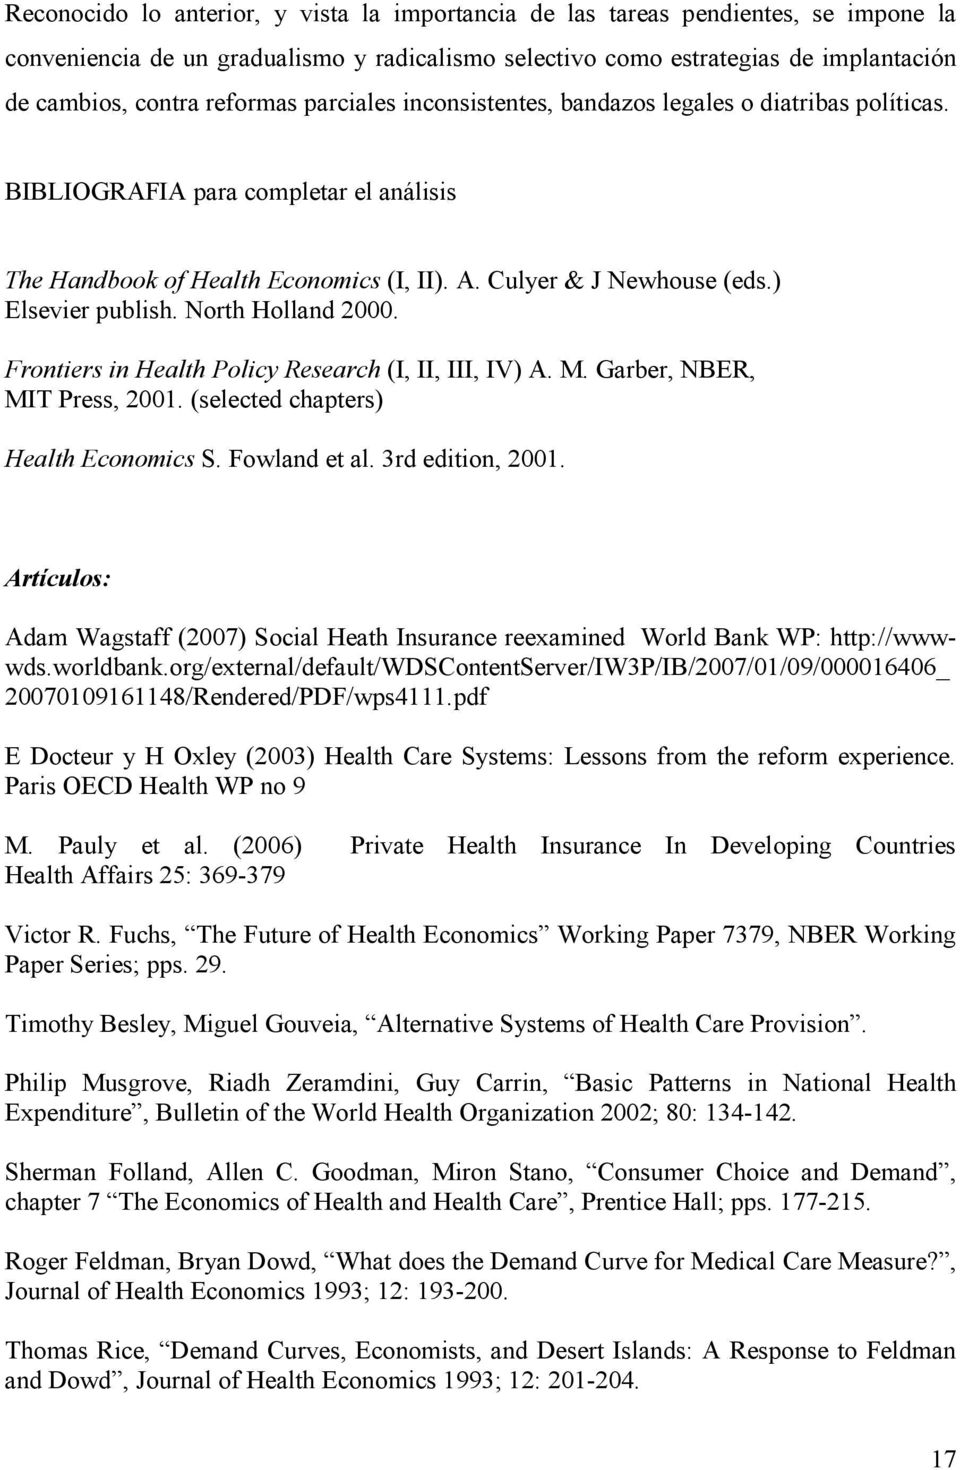 ) Elsevier publish. North Holland 2000. Frontiers in Health Policy Research (I, II, III, IV) A. M. Garber, NBER, MIT Press, 2001. (selected chapters) Health Economics S. Fowland et al.